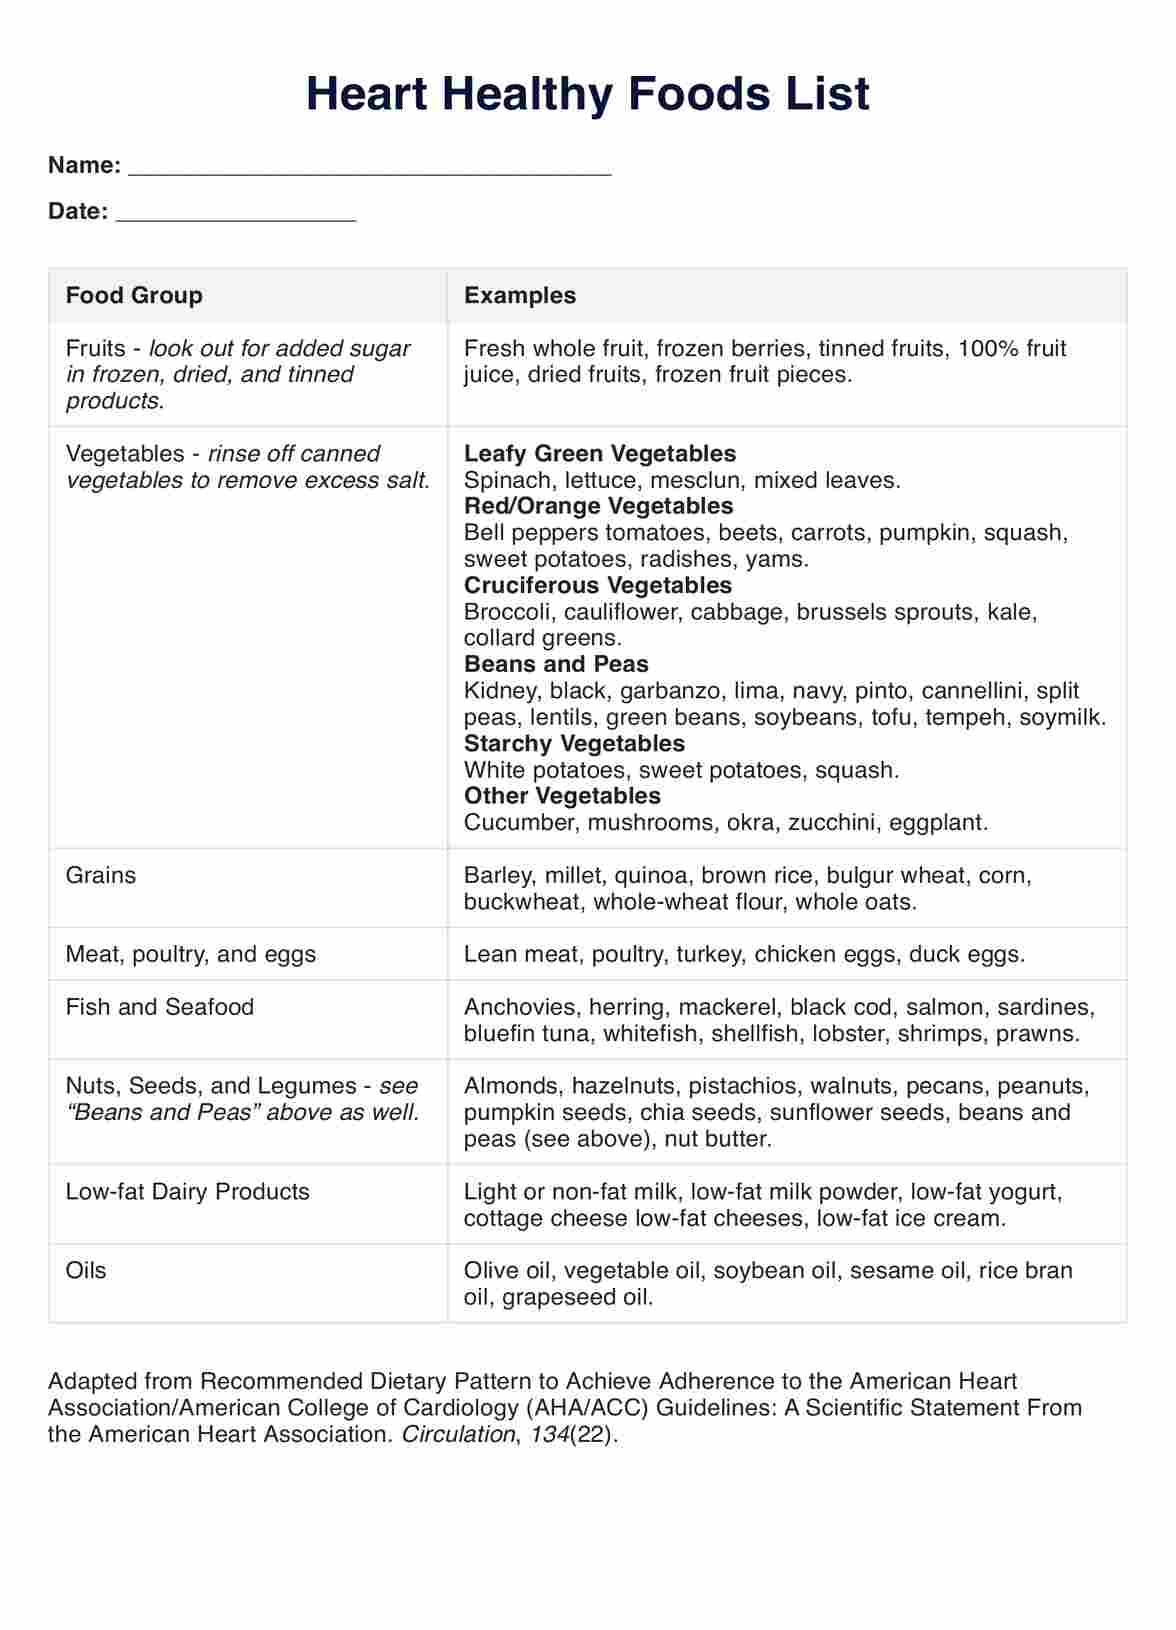  Heart Healthy Foods PDF Example